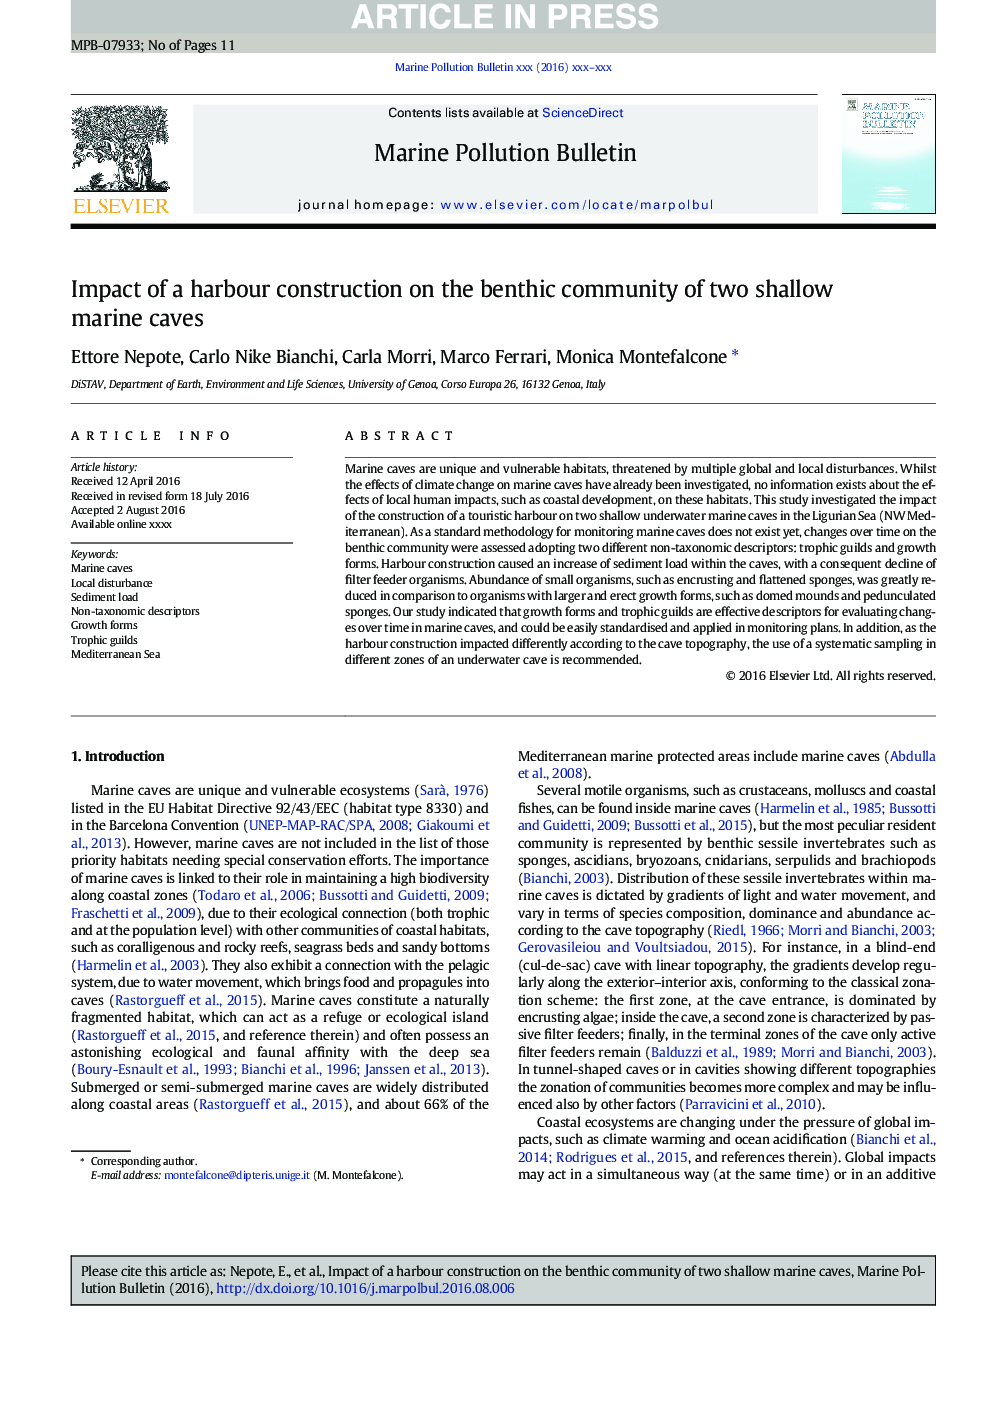 Impact of a harbour construction on the benthic community of two shallow marine caves